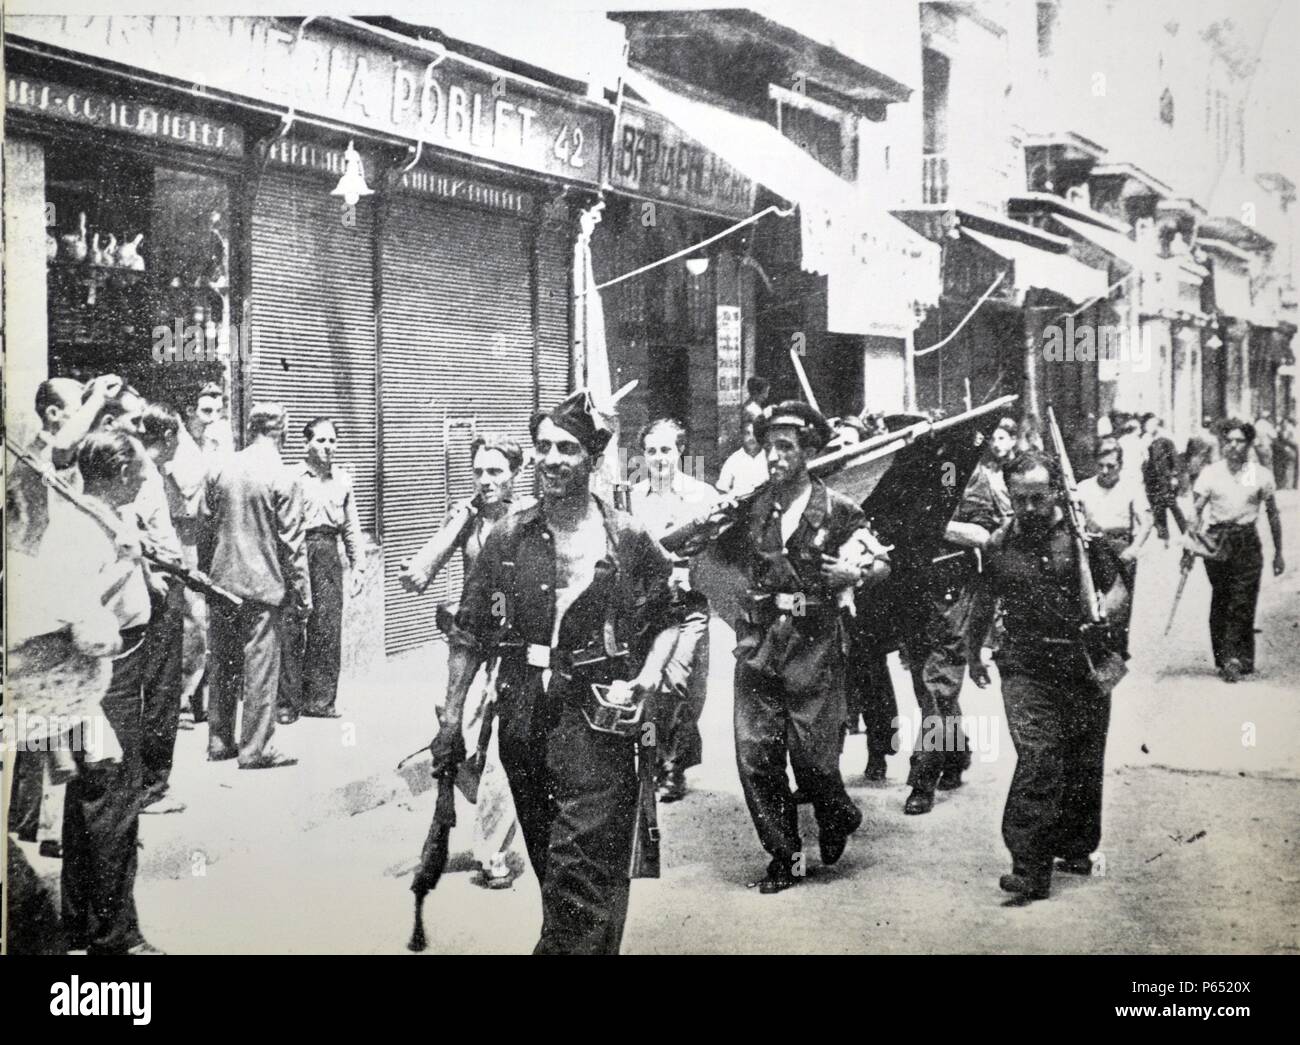 Enthusiastic republican fighters carry a captured flag during the Spanish civil war, Barcelona 1937 Stock Photo